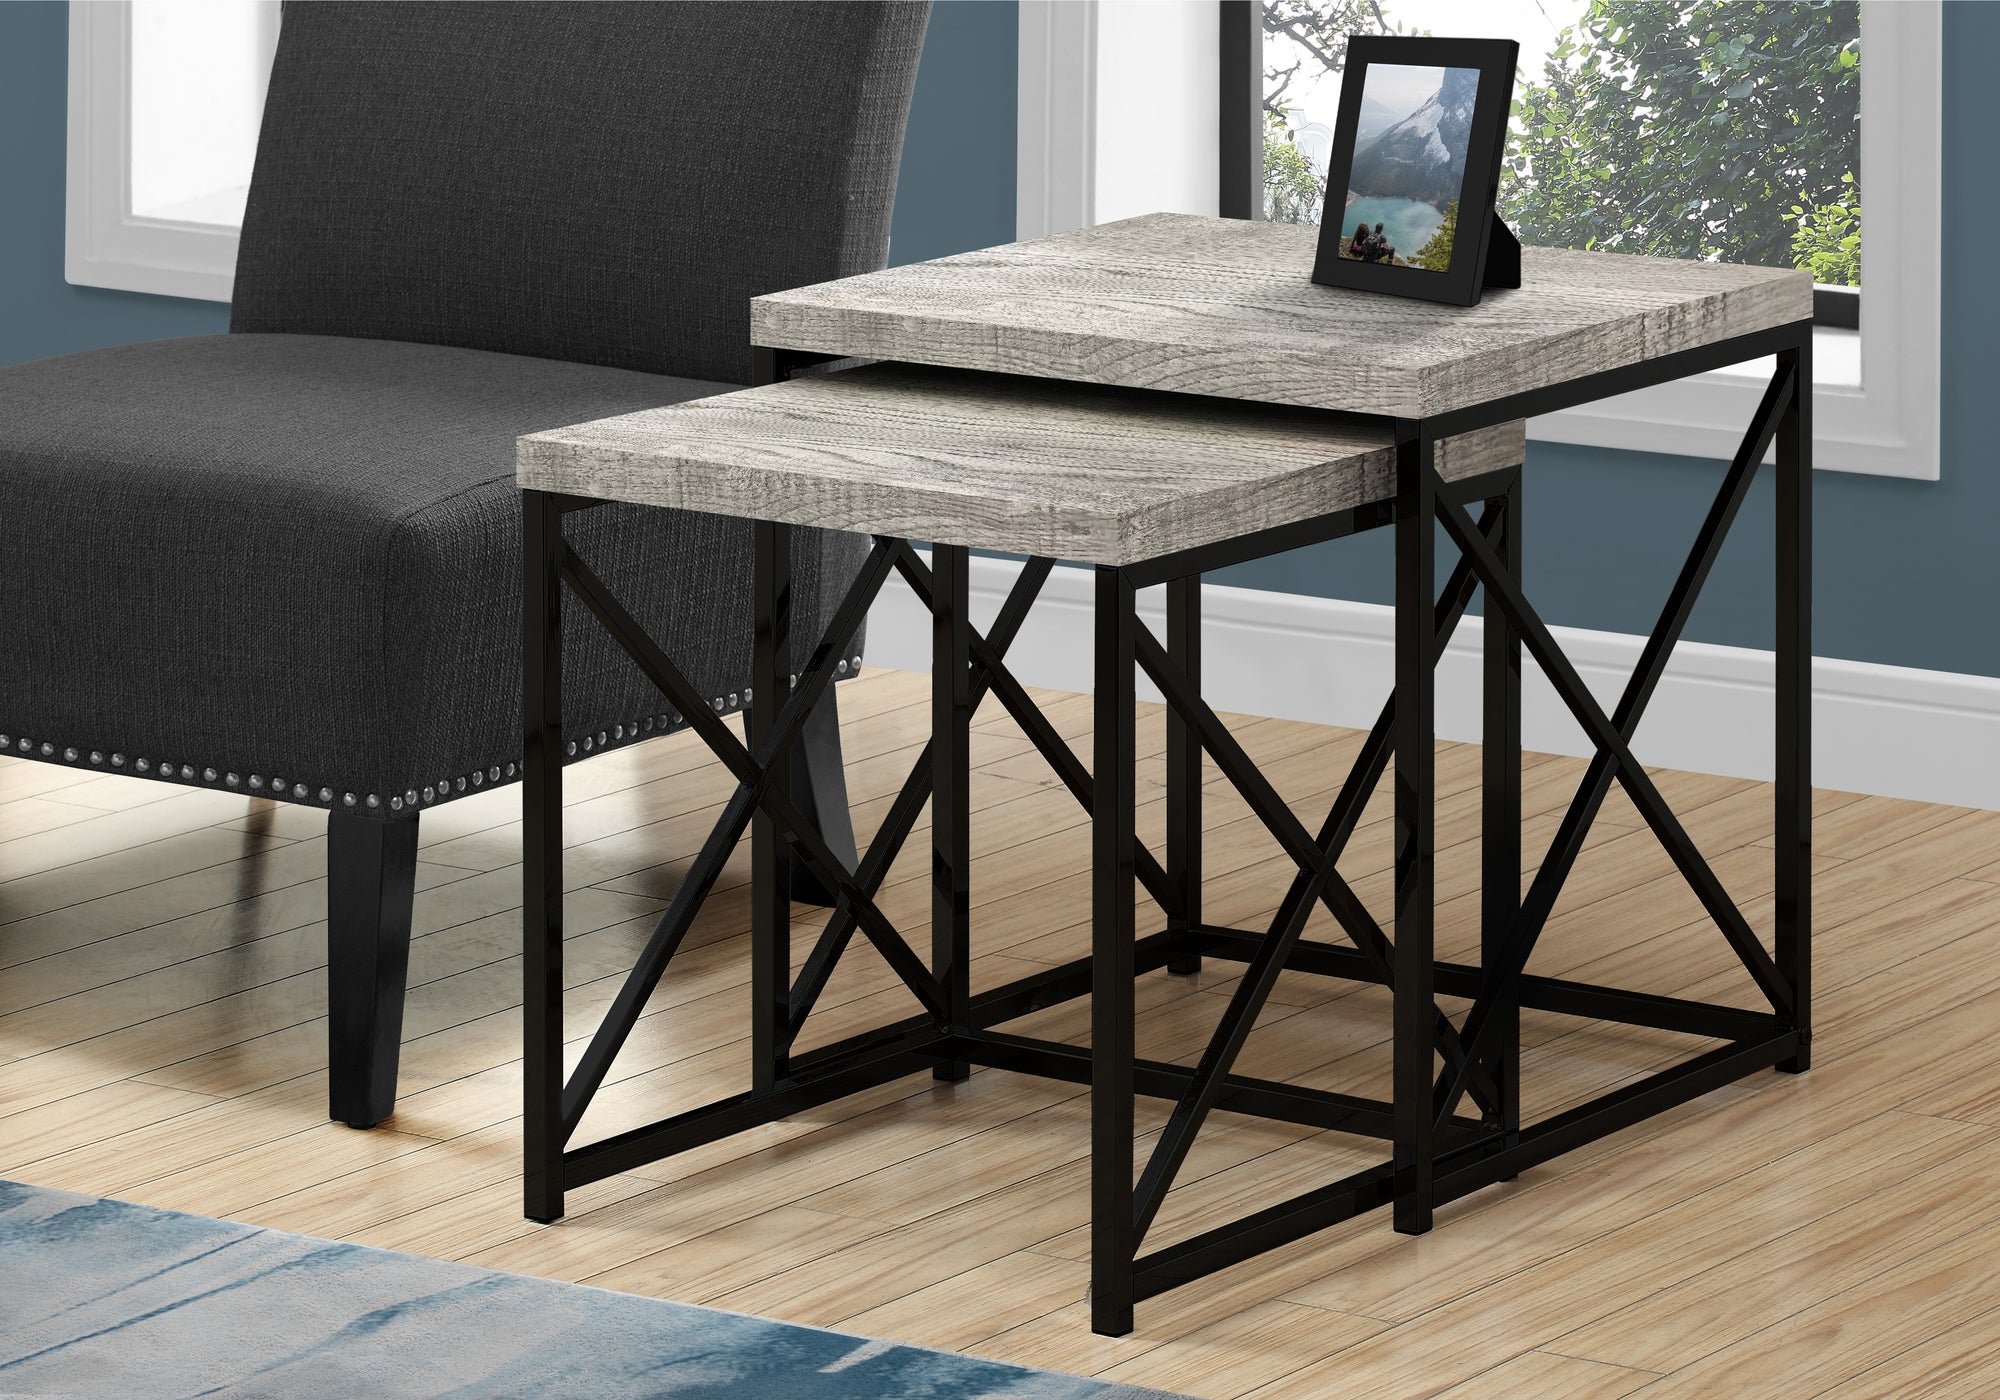 I 3414 - NESTING TABLE - 2PCS SET / GREY RECLAIMED WOOD / BLACK By Monarch Specialties Inc